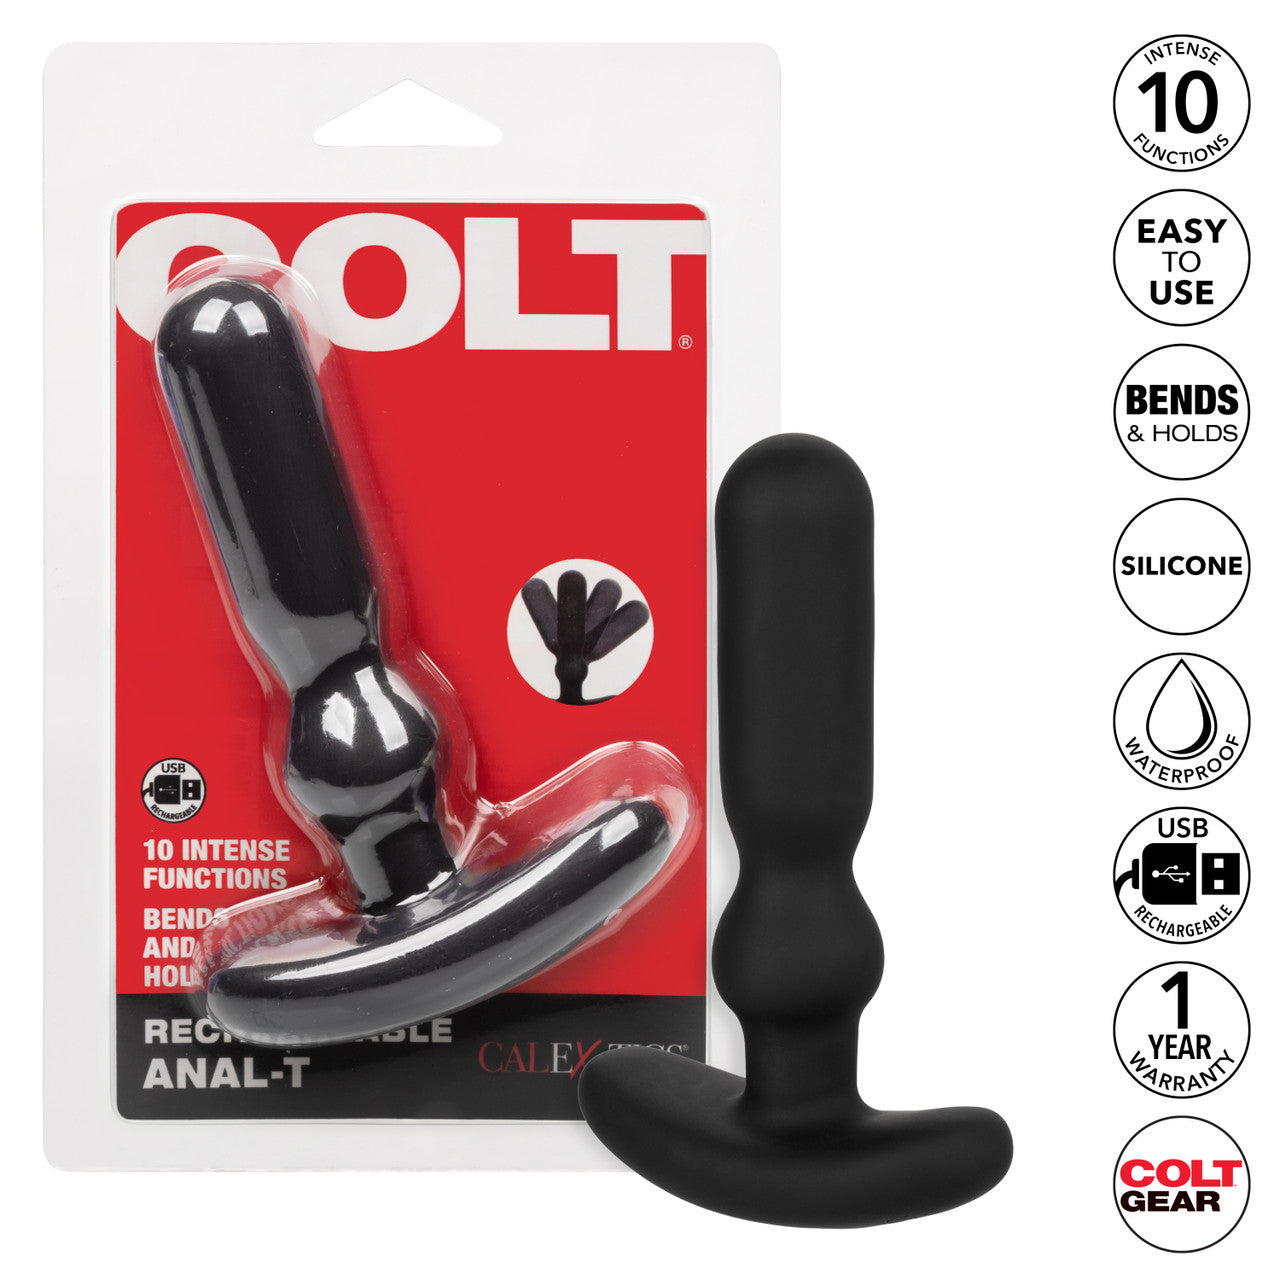 The Colt Rechargeable Anal-T Prostate Massager next to its packaging.